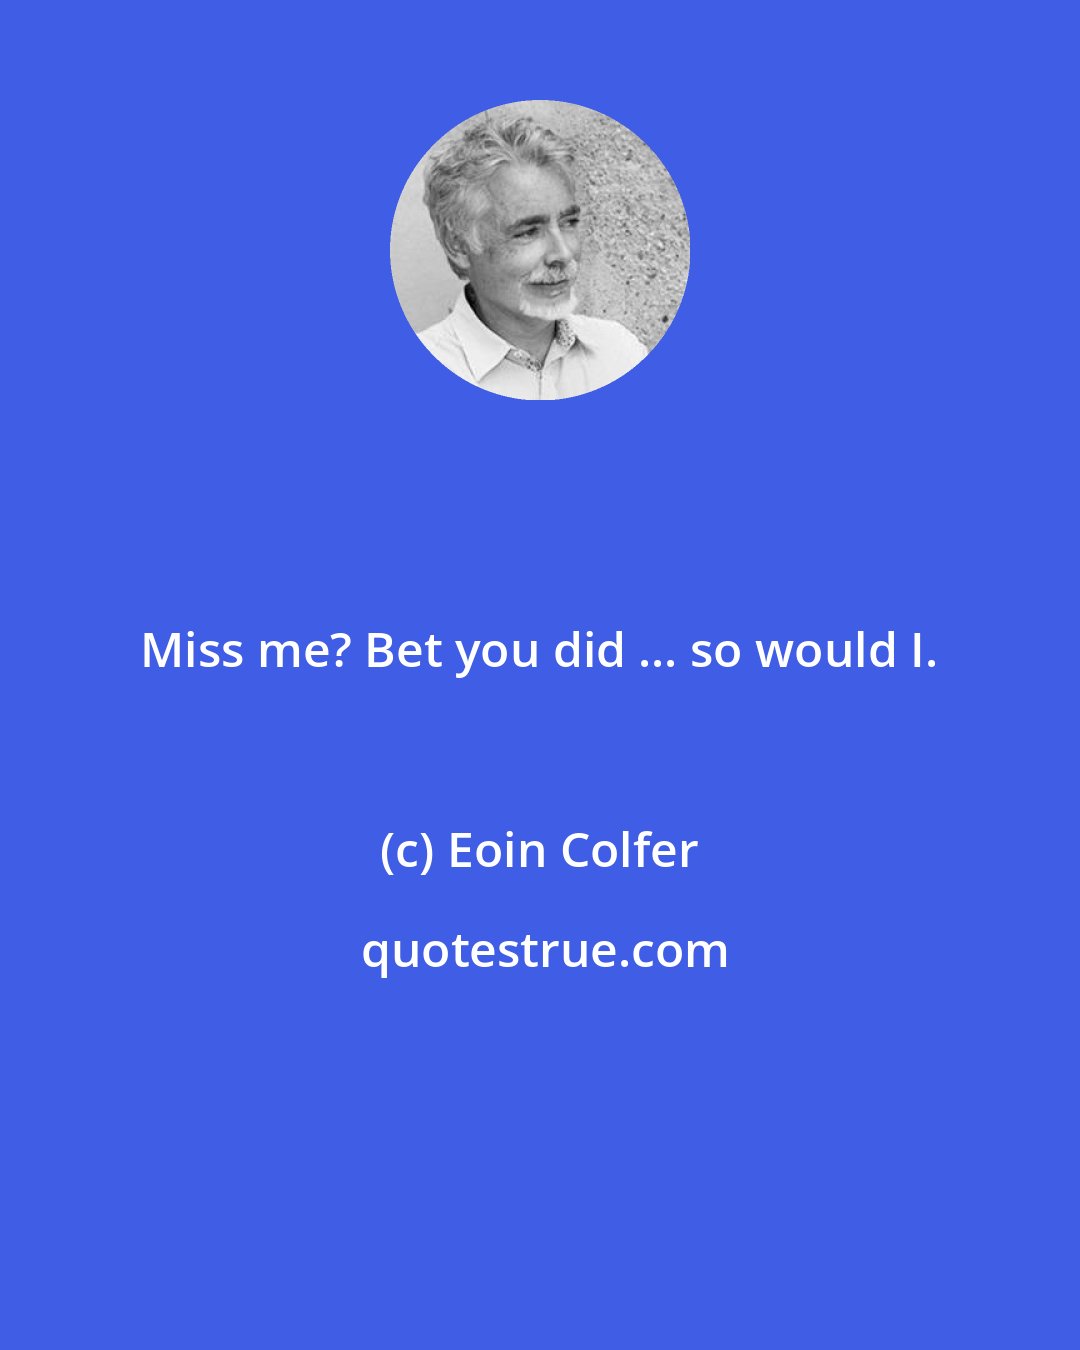 Eoin Colfer: Miss me? Bet you did ... so would I.